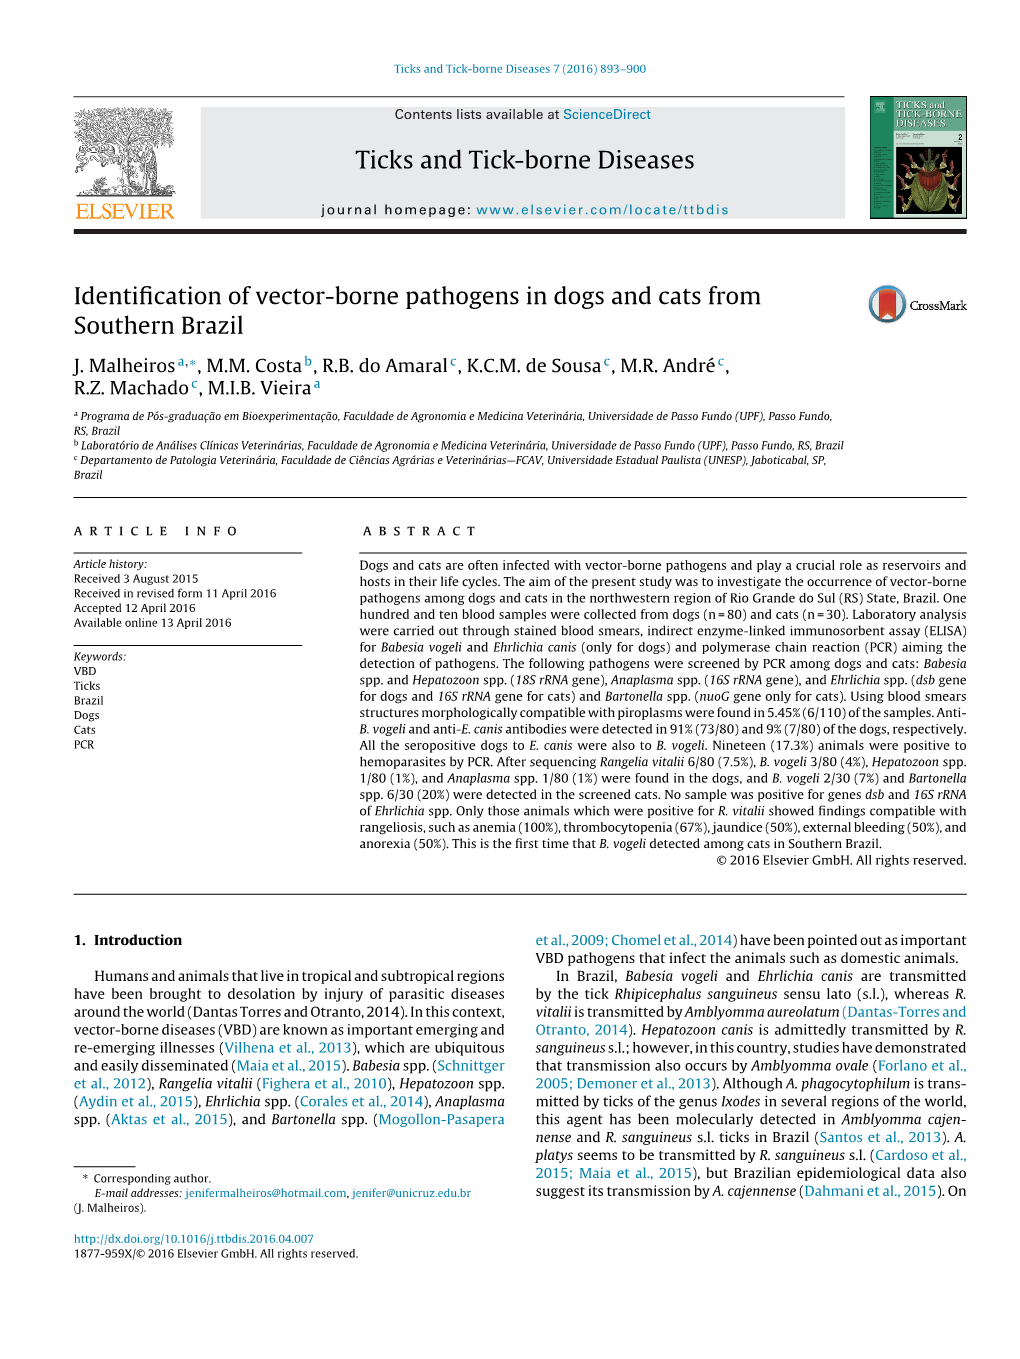 Identification of Vector-Borne Pathogens in Dogs and Cats From